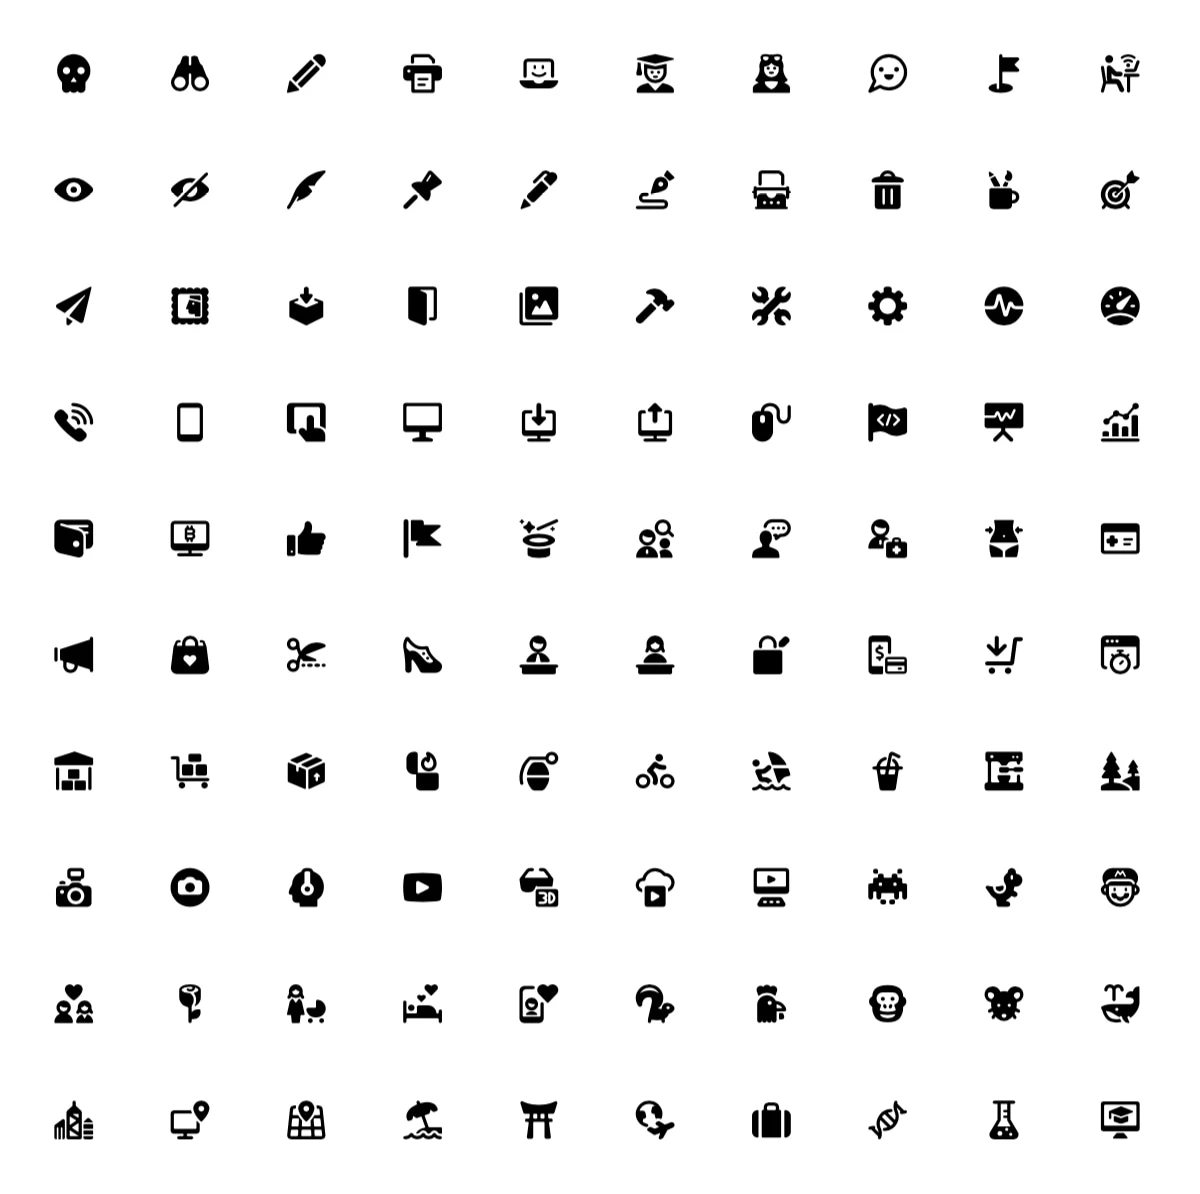 Free Streamline Icons - Streamline 3.0 is the world’s largest icon library